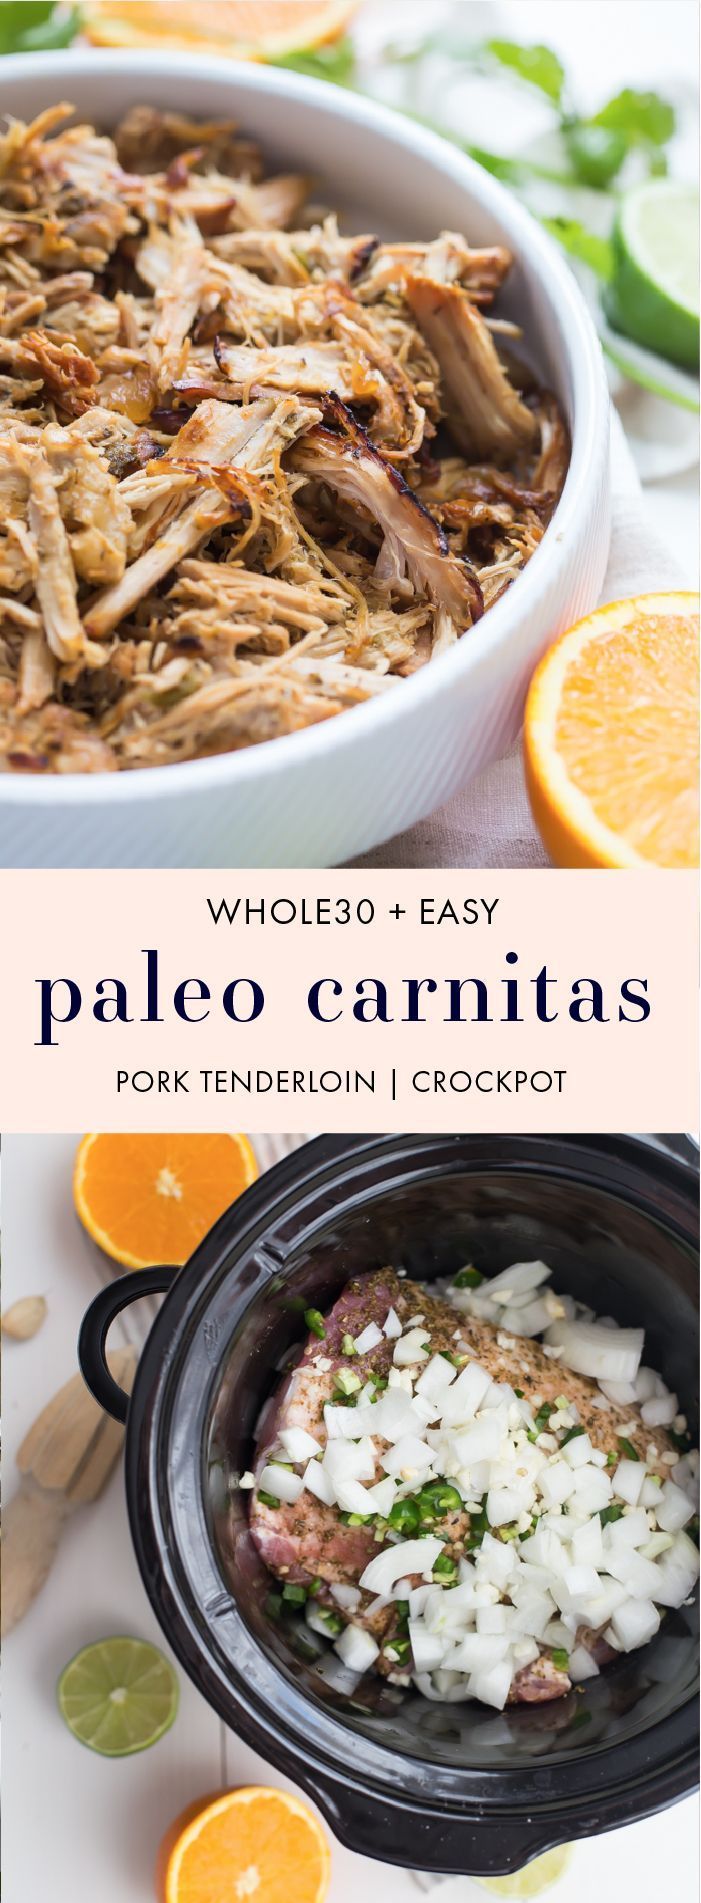 These paleo carnitas are made with pork tenderloin in the Crockpot for an easy Whole30 dinner. Pork tenderloin makes these paleo